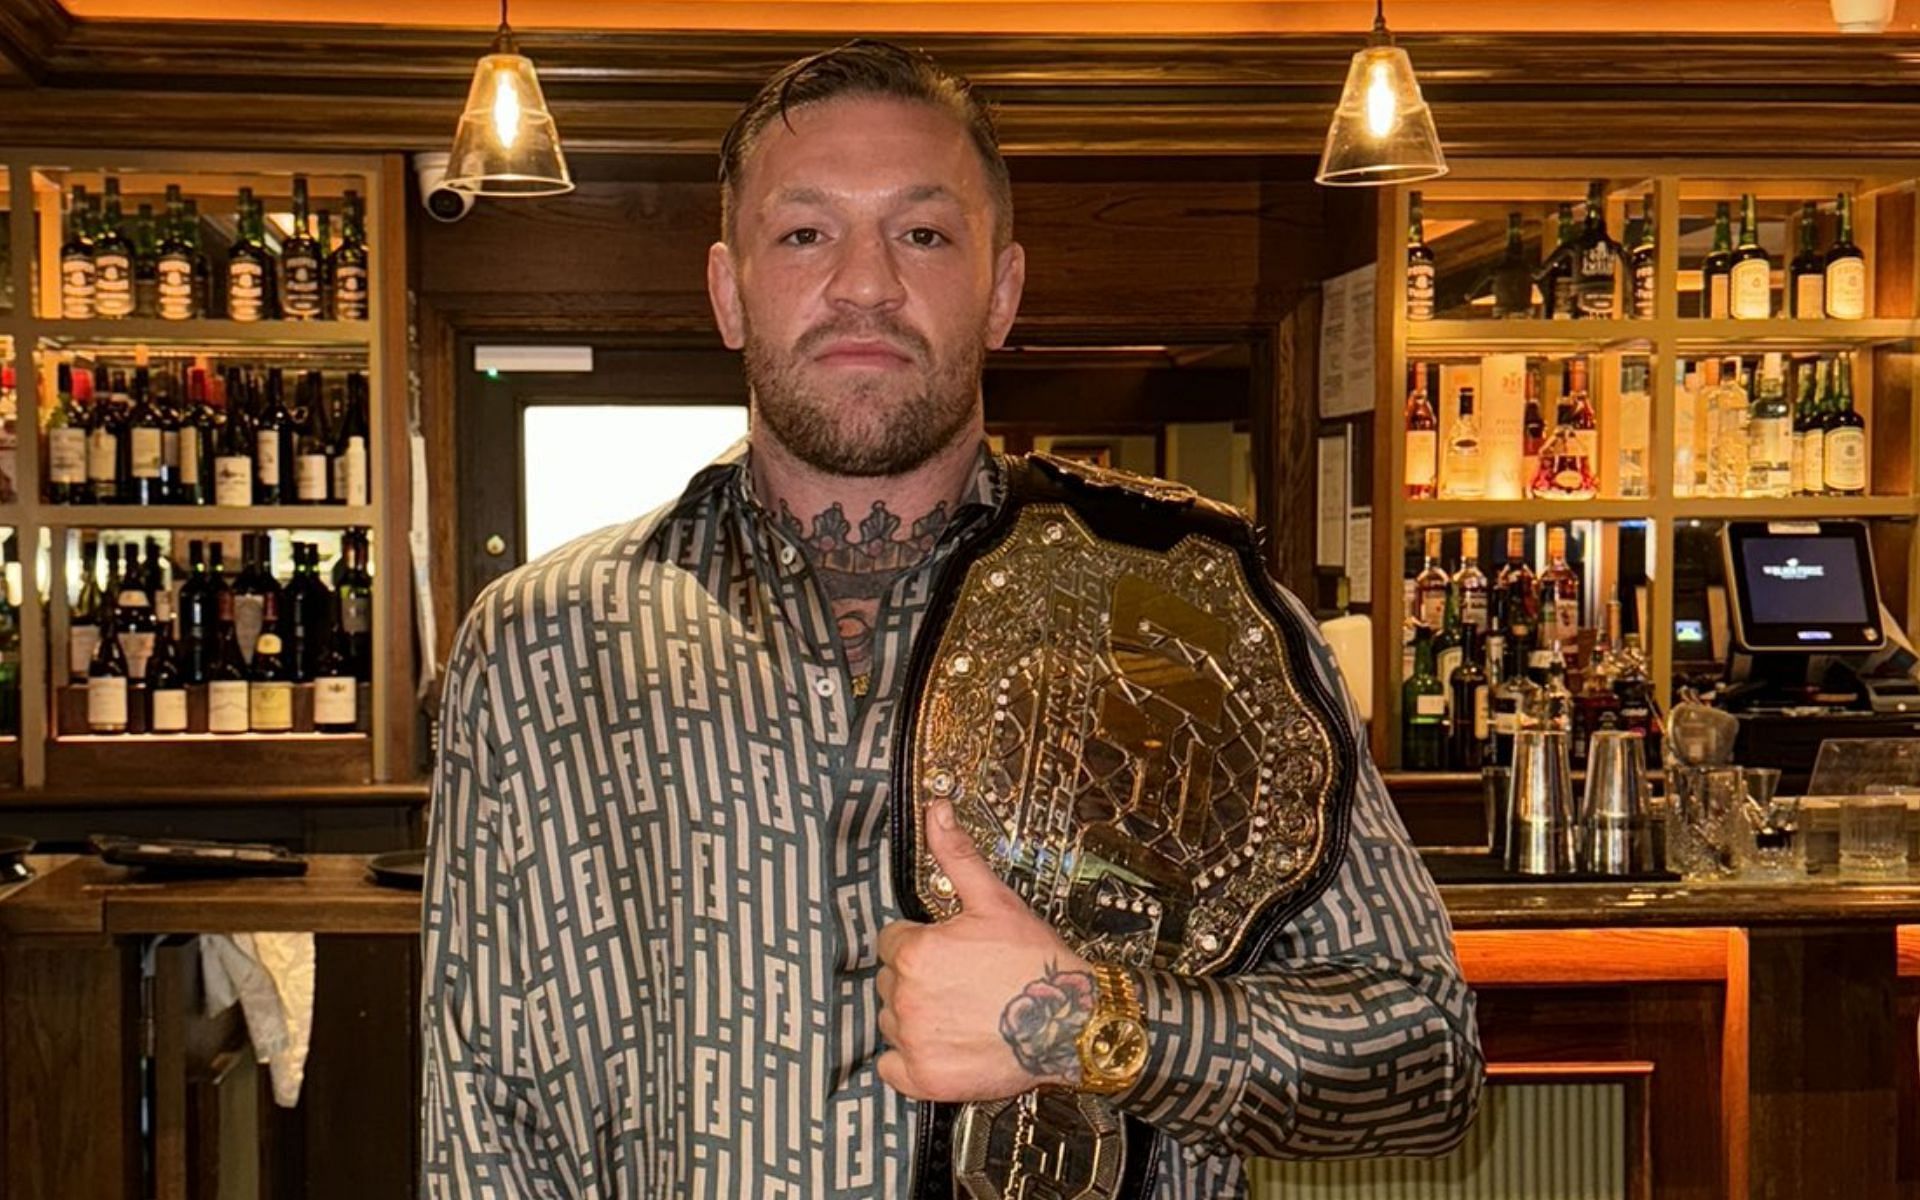 Conor McGregor [Pictured] becomes most tested UFC fighter  [Image courtesy: @TheNotoriousMMA - X]